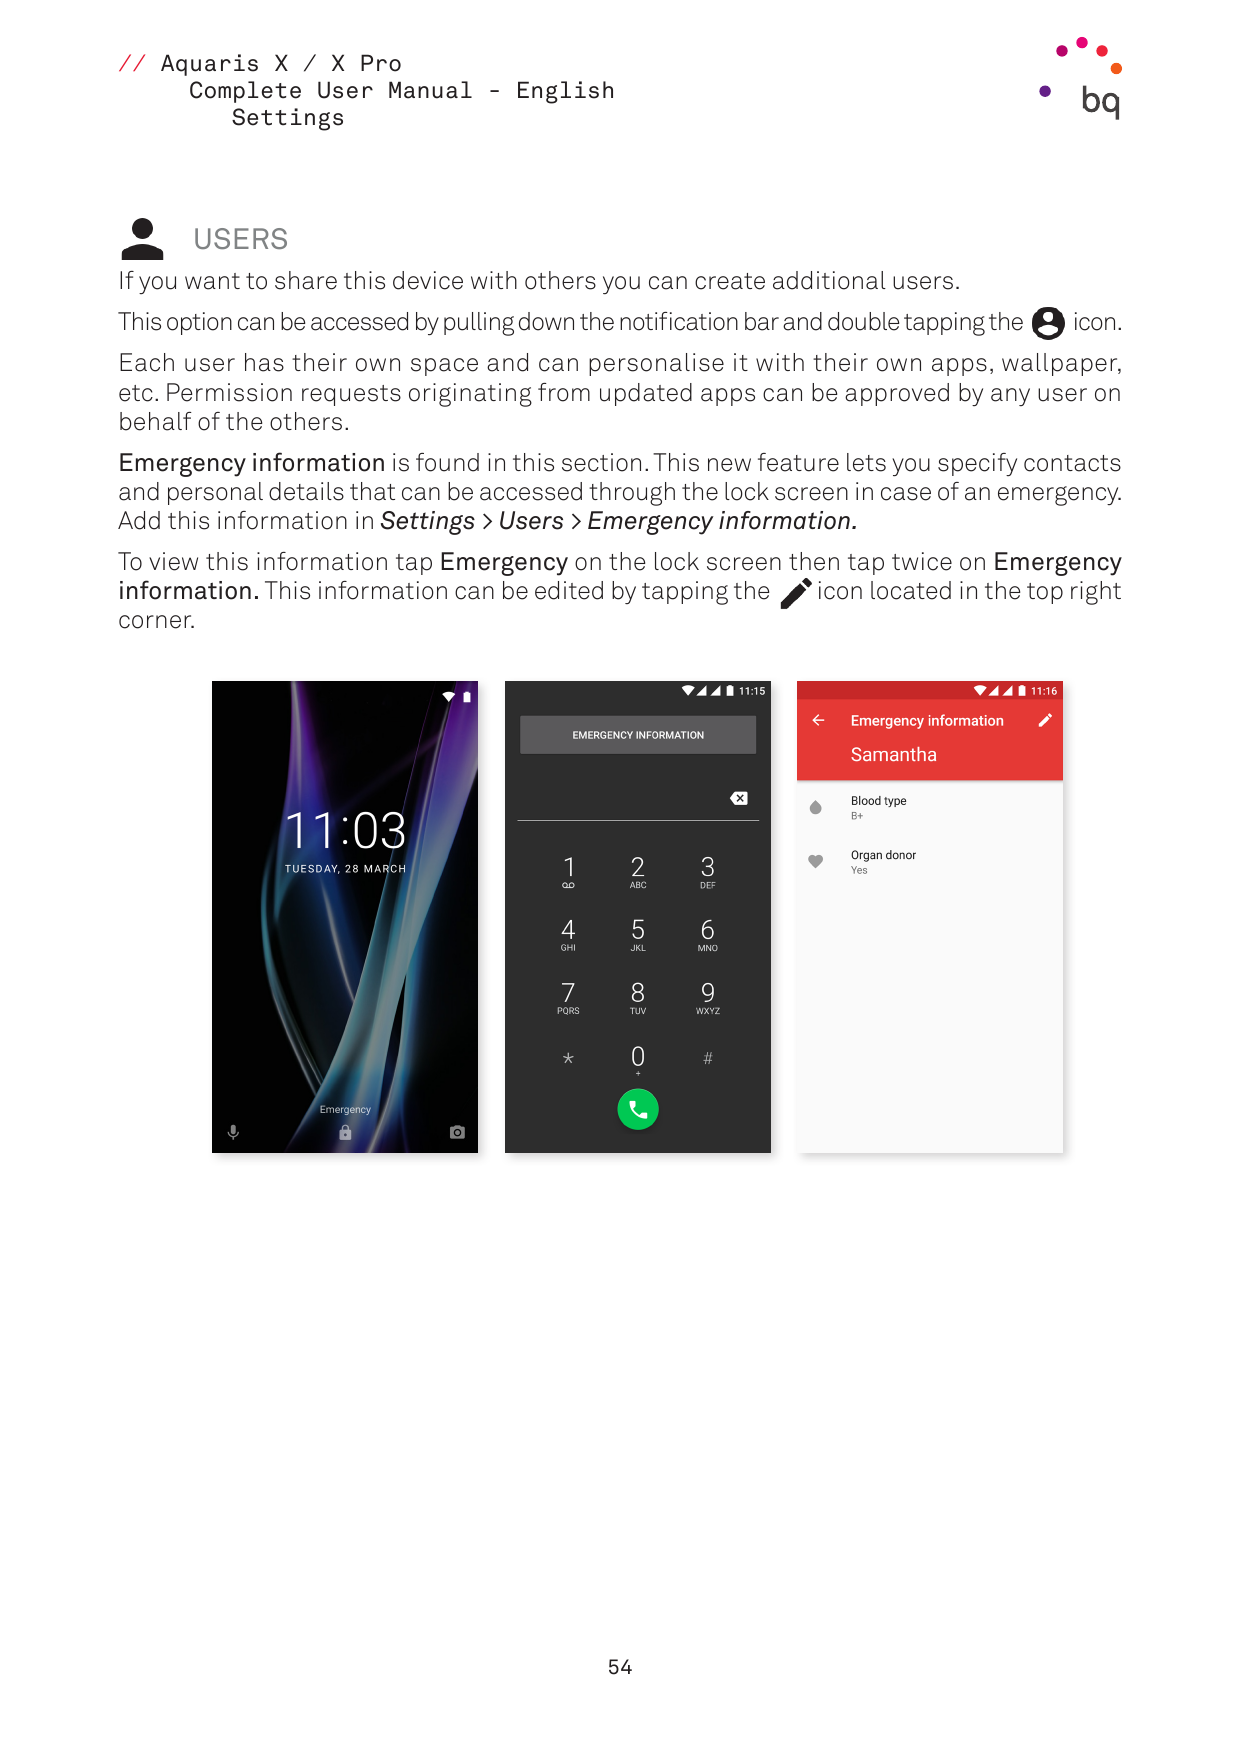 // Aquaris X / X ProComplete User Manual - EnglishSettingsUSERSIf you want to share this device with others you can create addit